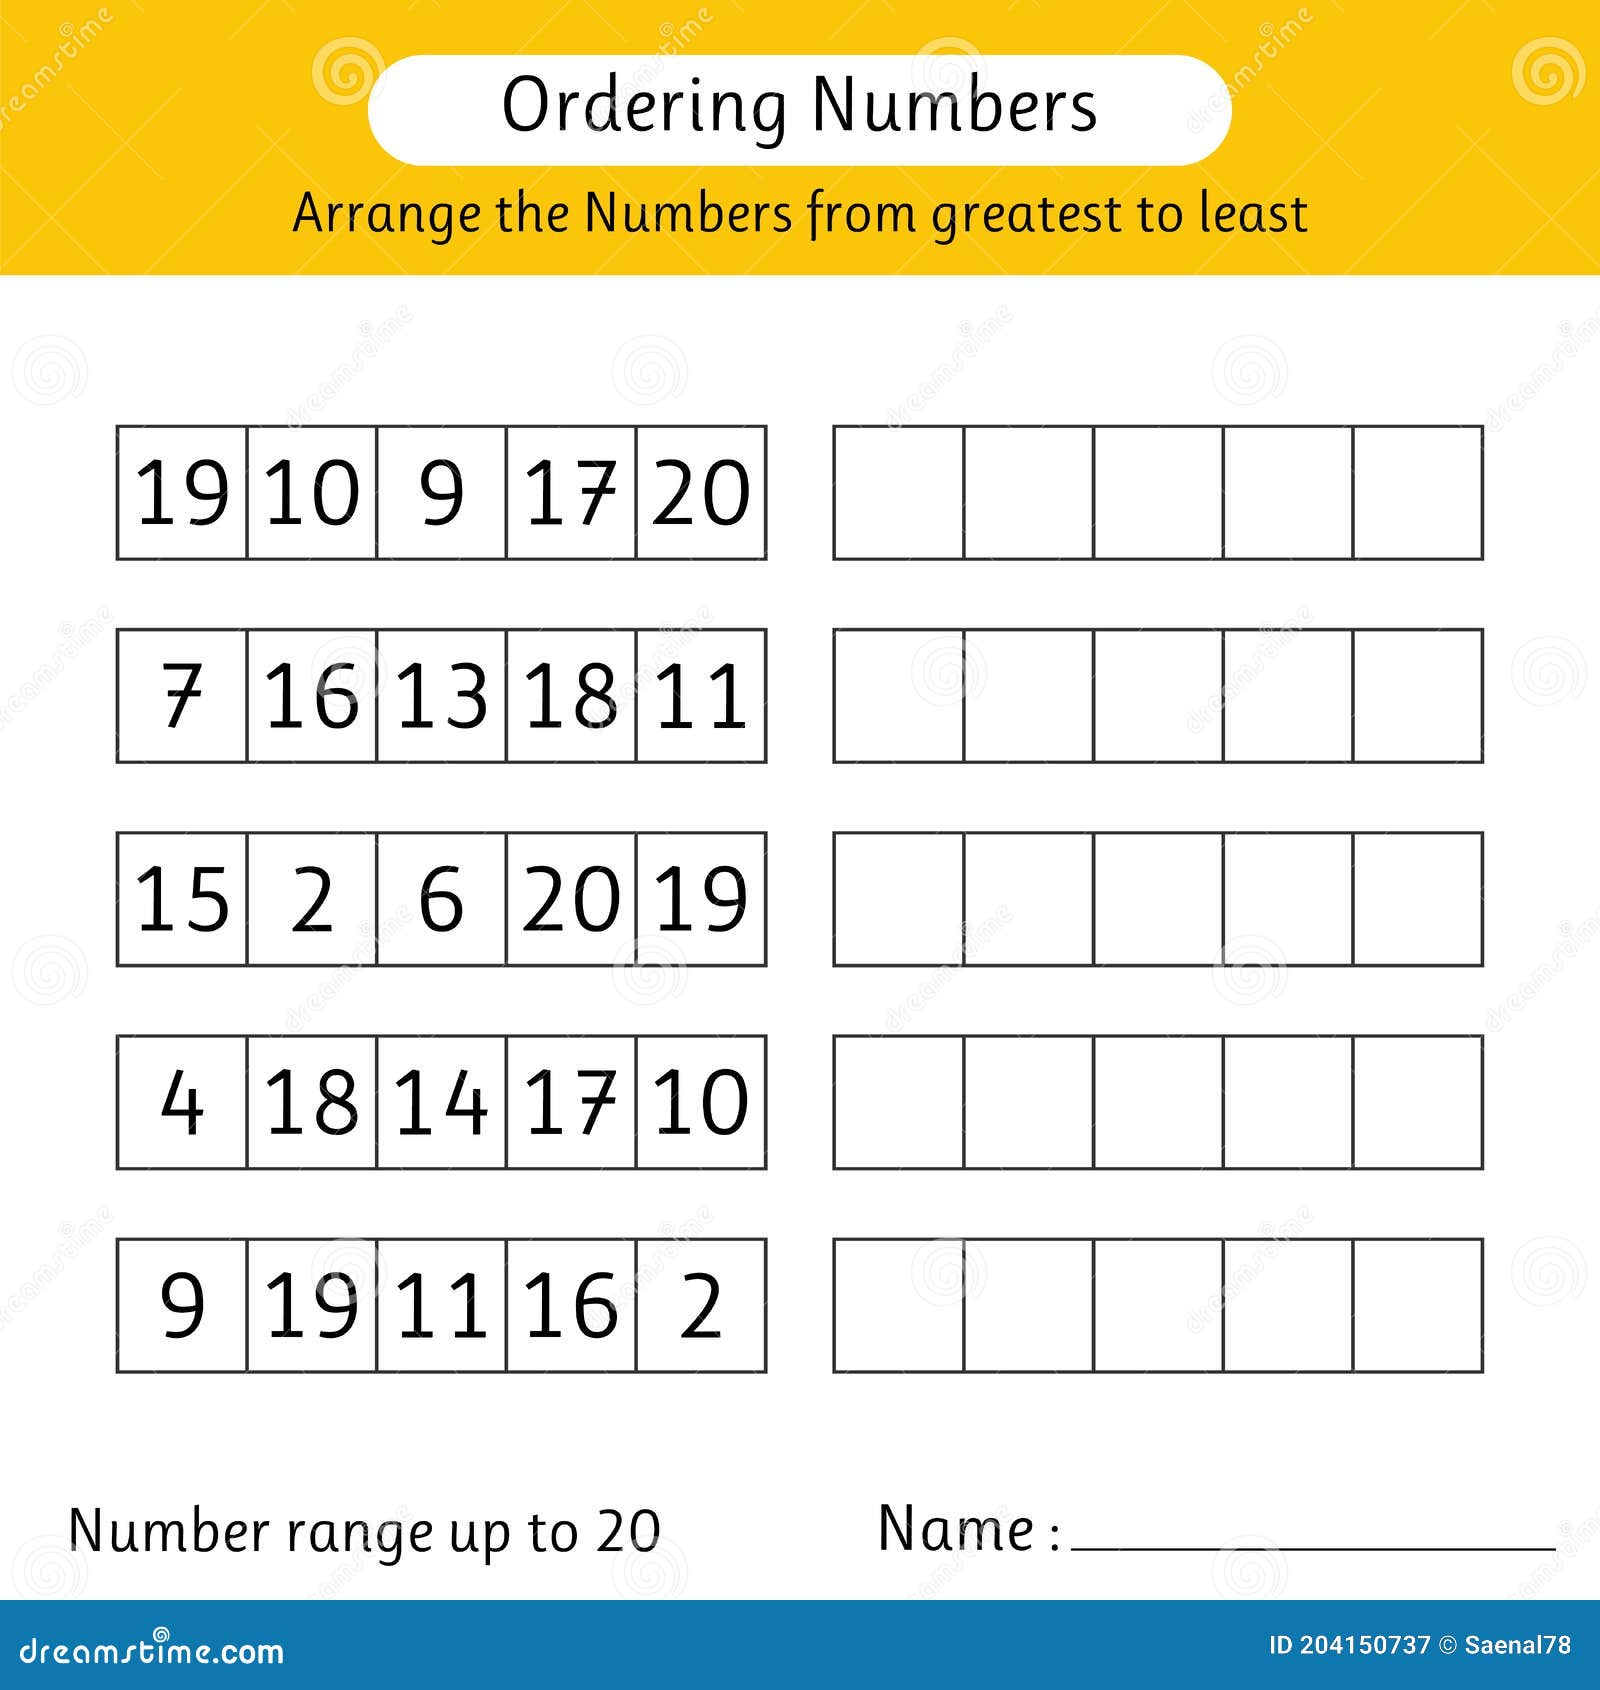 ordering-numbers-worksheet-arrange-the-numbers-from-greatest-to-least